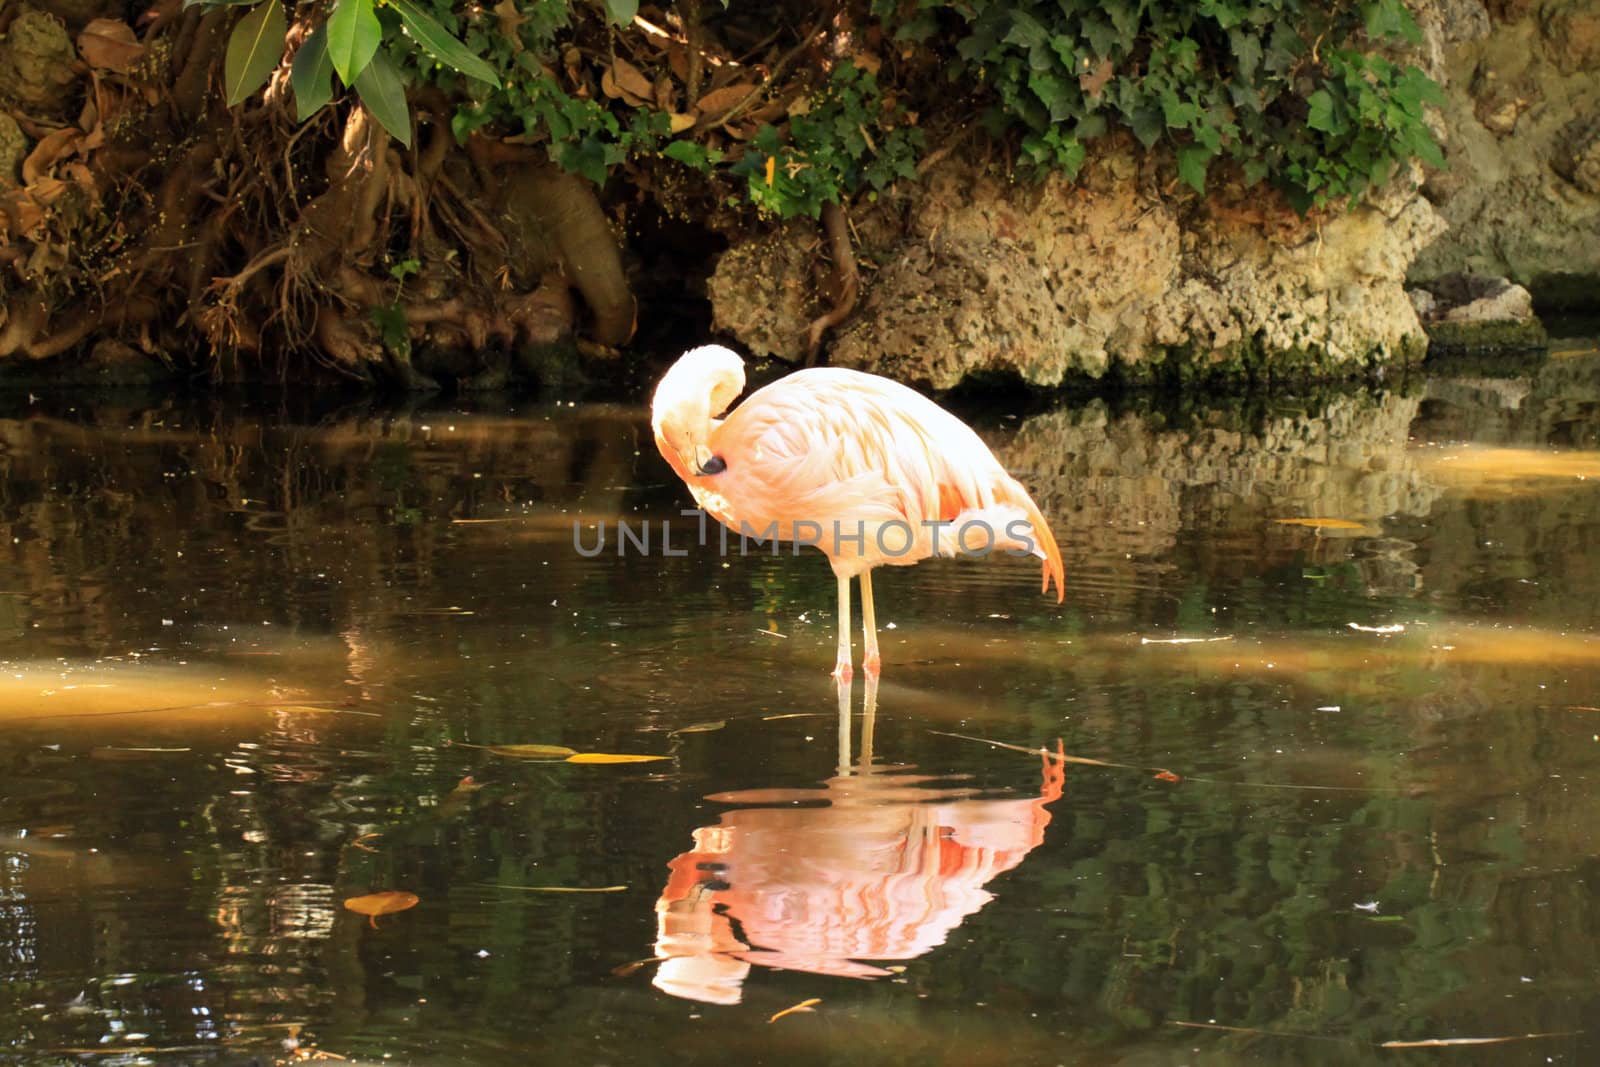 Chilean Flamingo - Phoenicopterus chilensis - Found in the Southern half of South America.